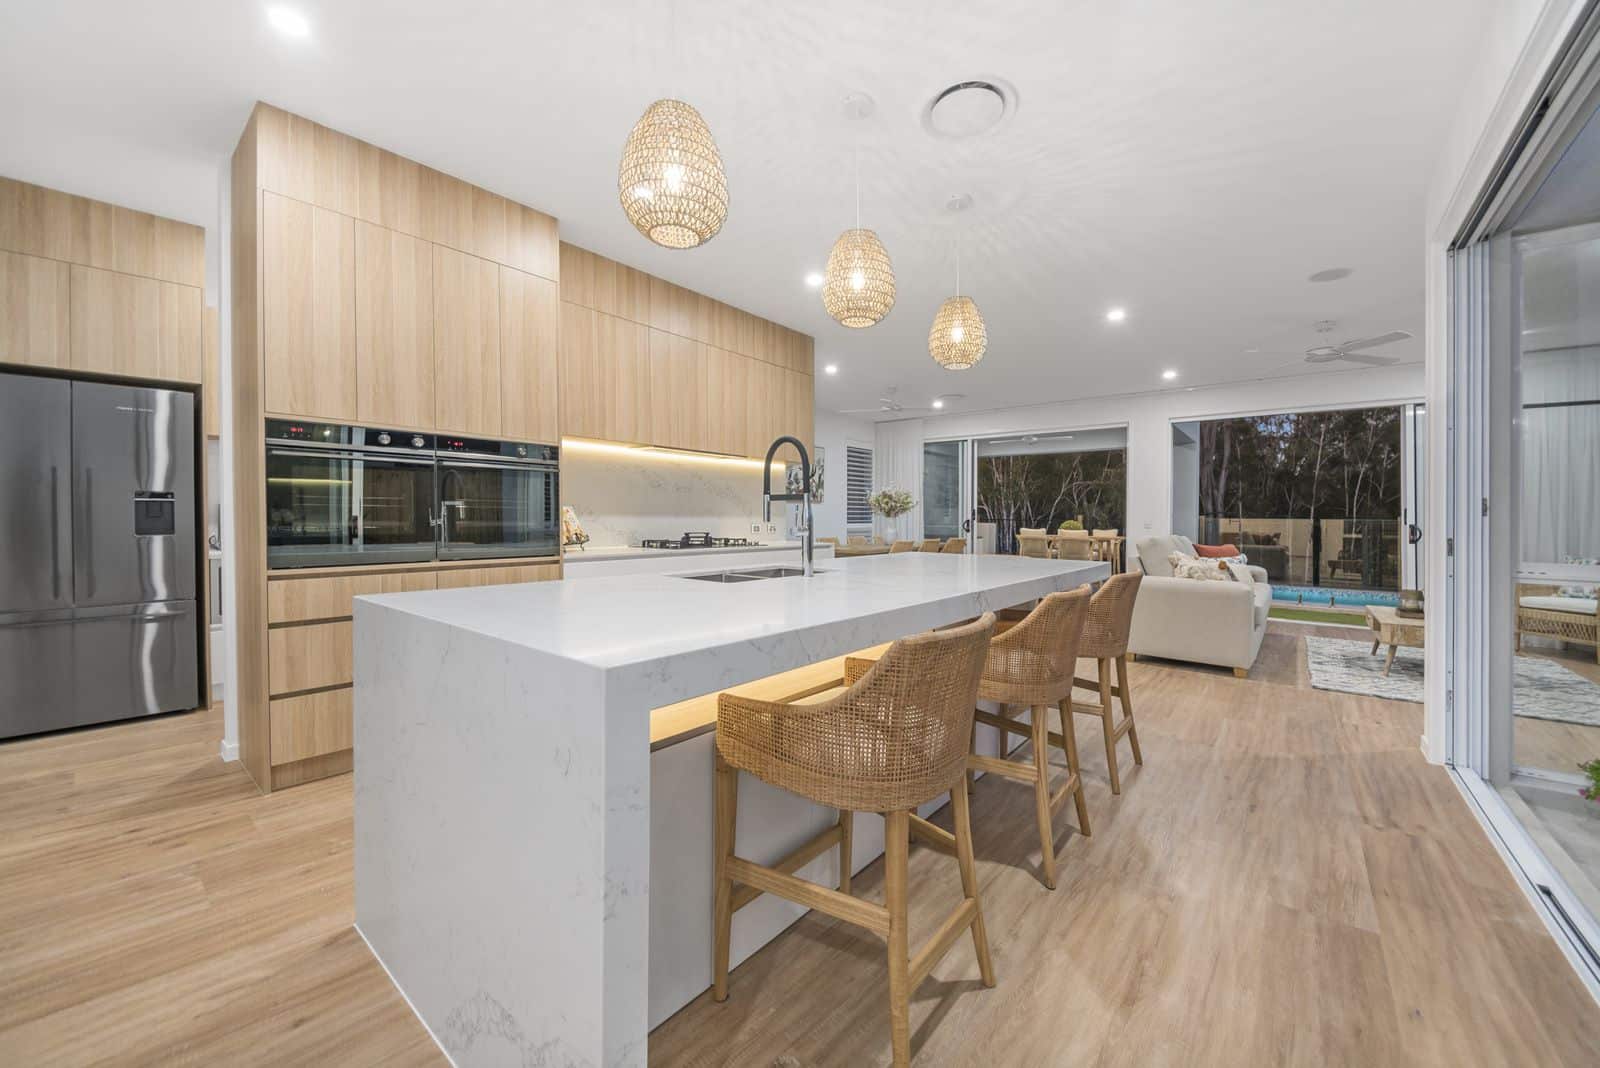 Kitchen Area With Vinyl Flooring — Totally Flooring In Gold Coast, QLD